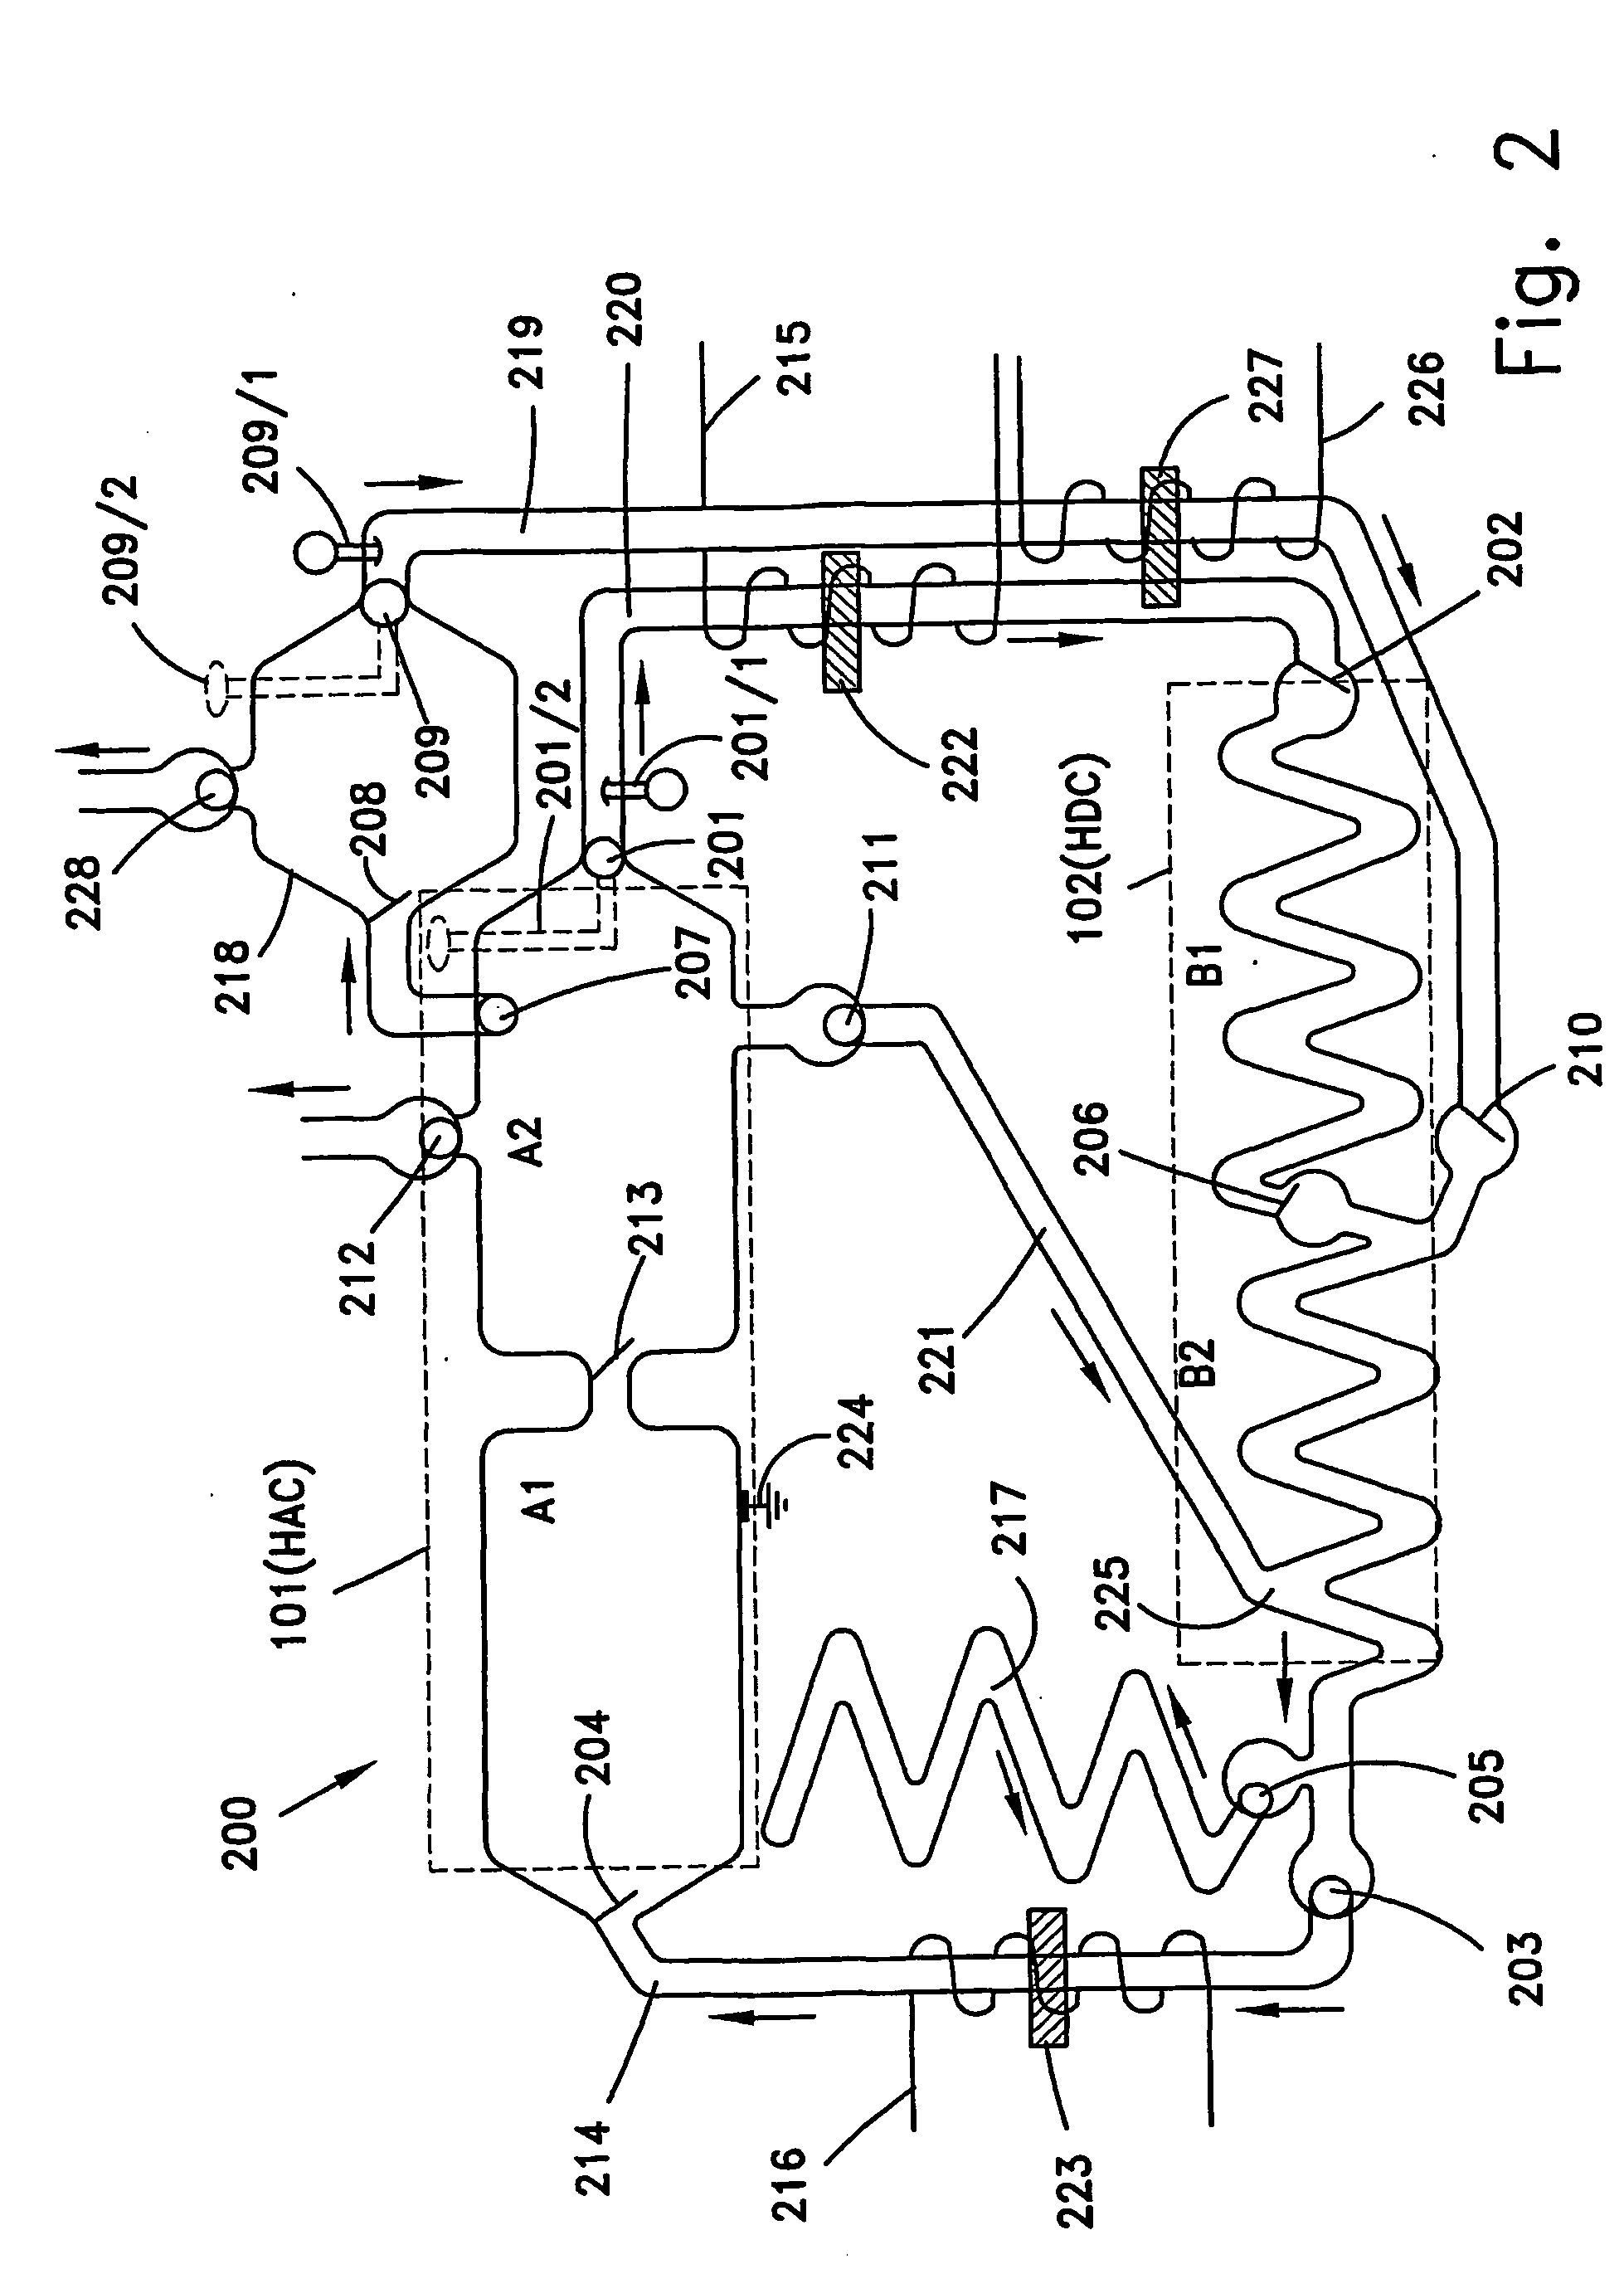 Thermal to electrical energy converter